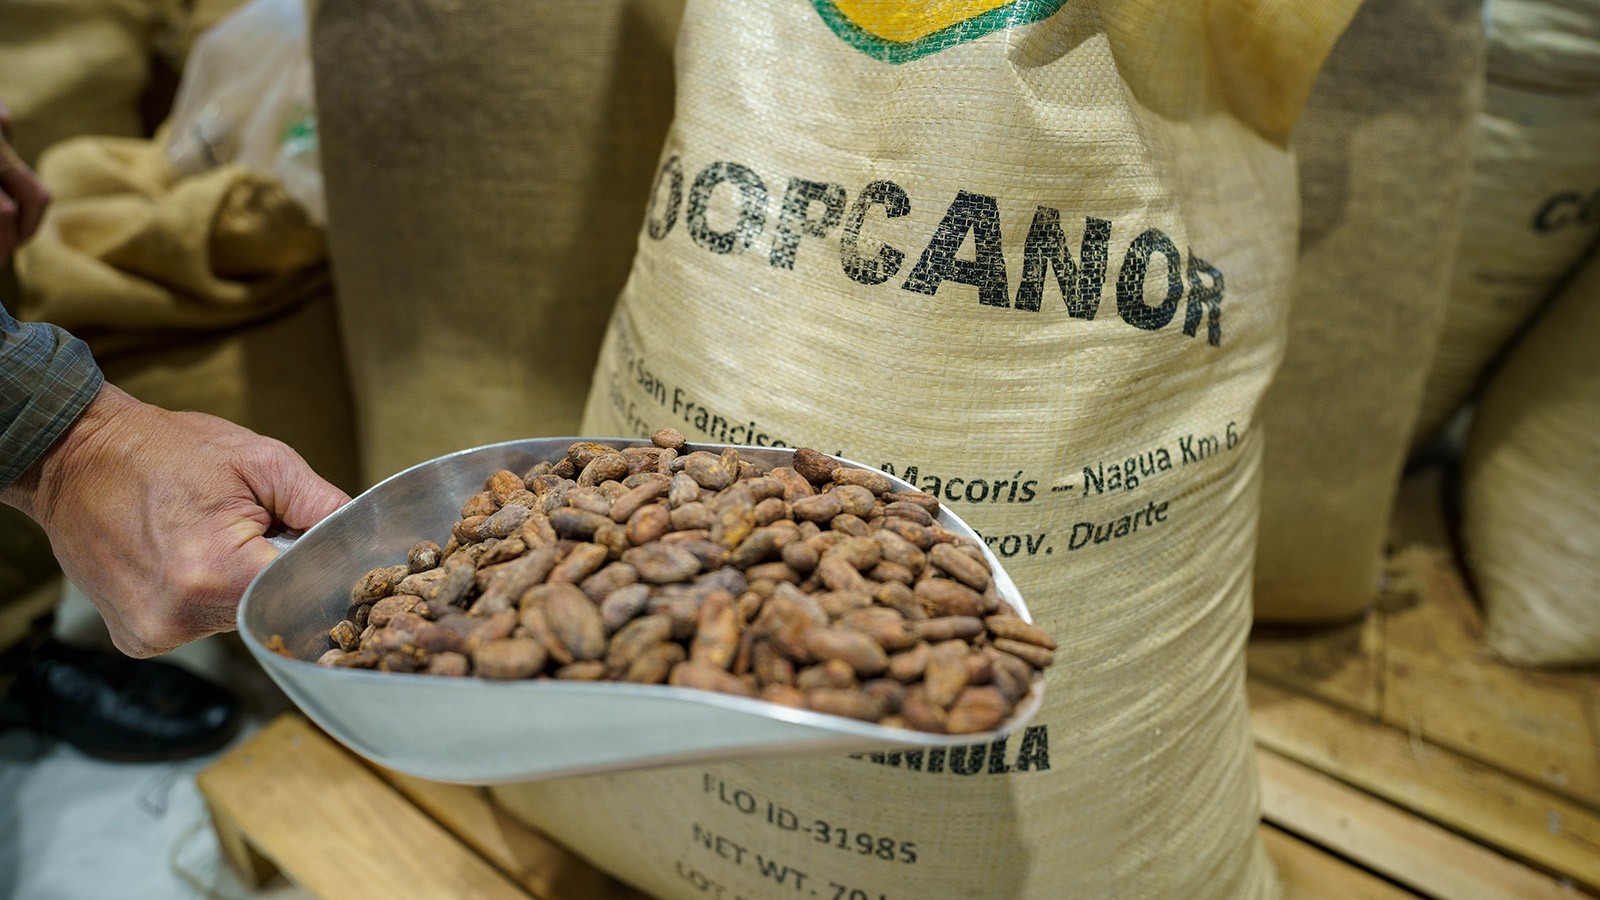 Cacao from Twenty Degrees, a sustainable cocoa bean supplier.